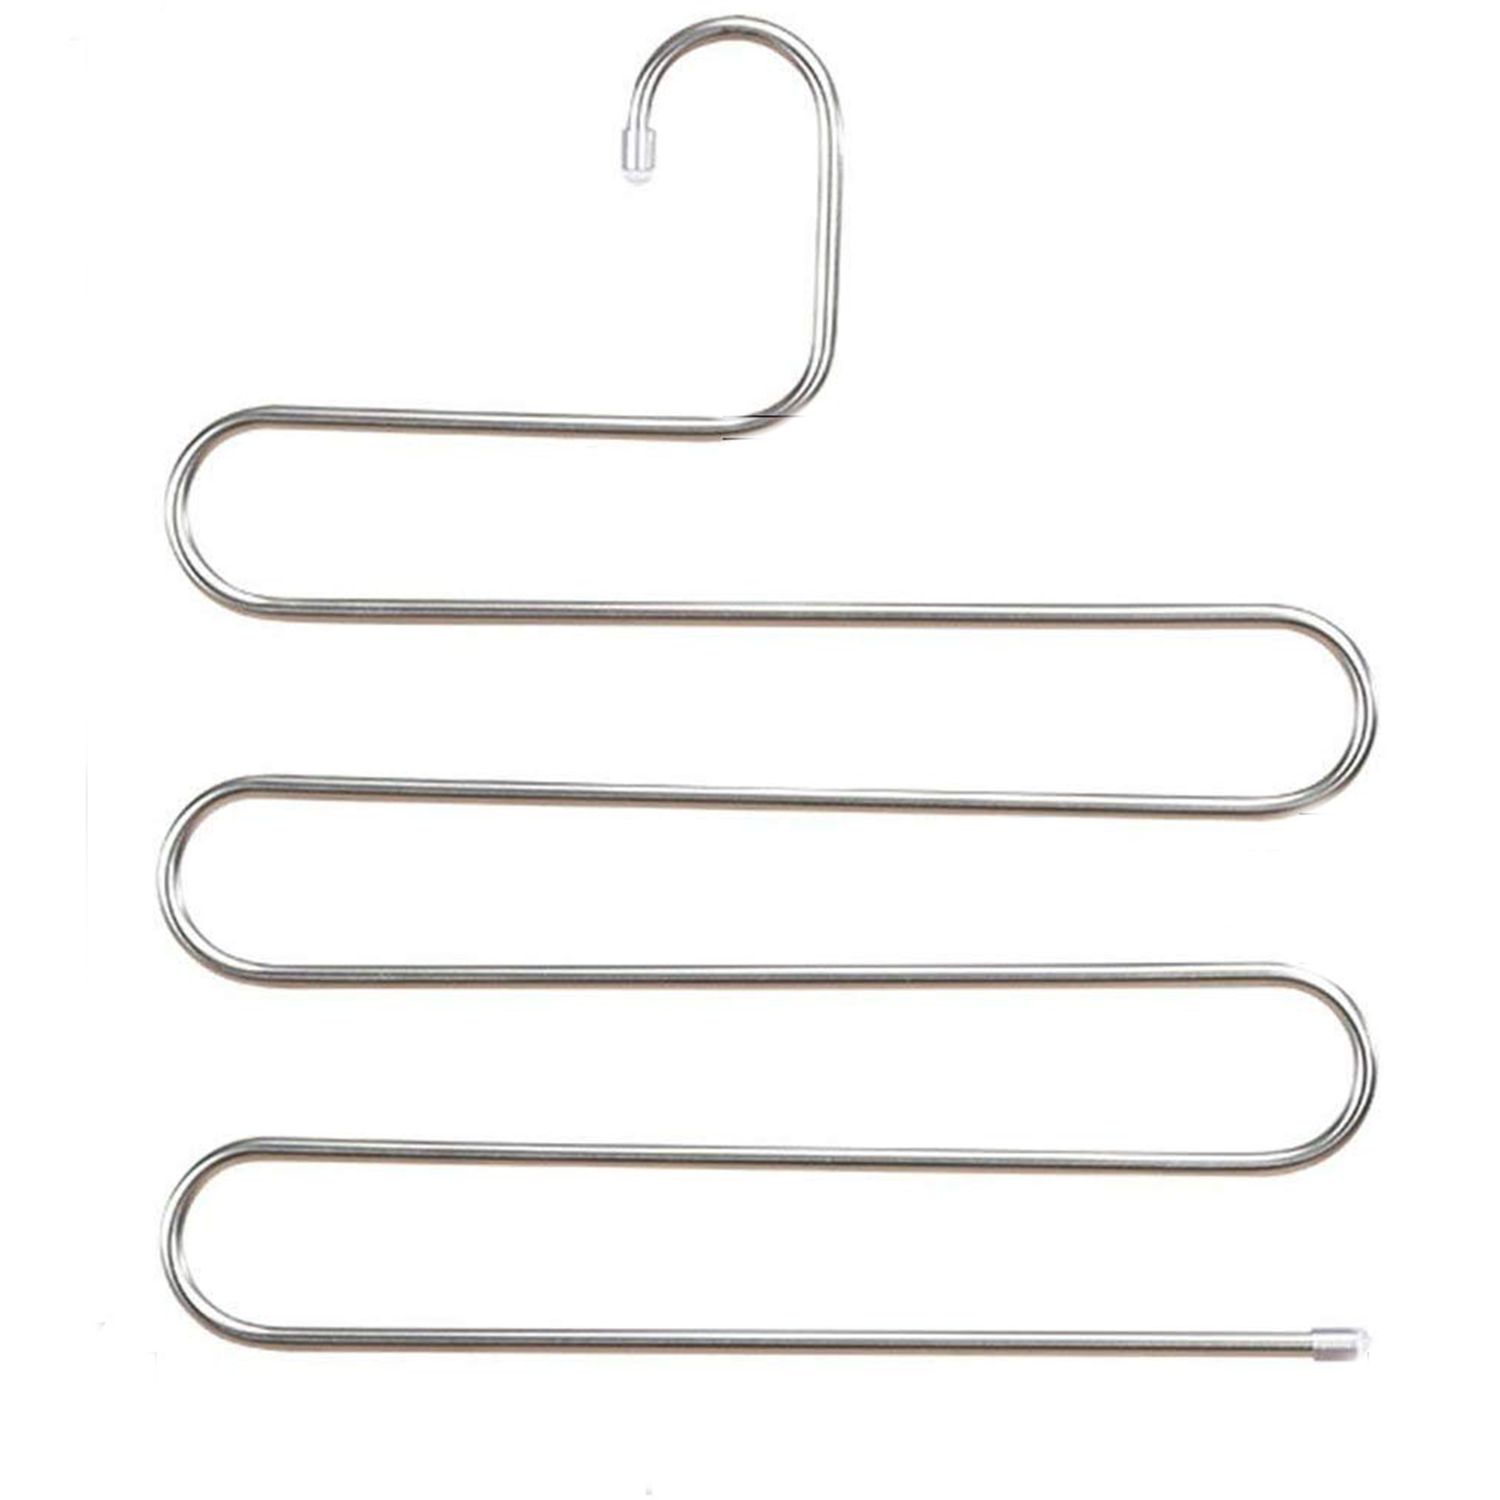 DOIOWN S-Type Stainless Steel Clothes Pants Hangers